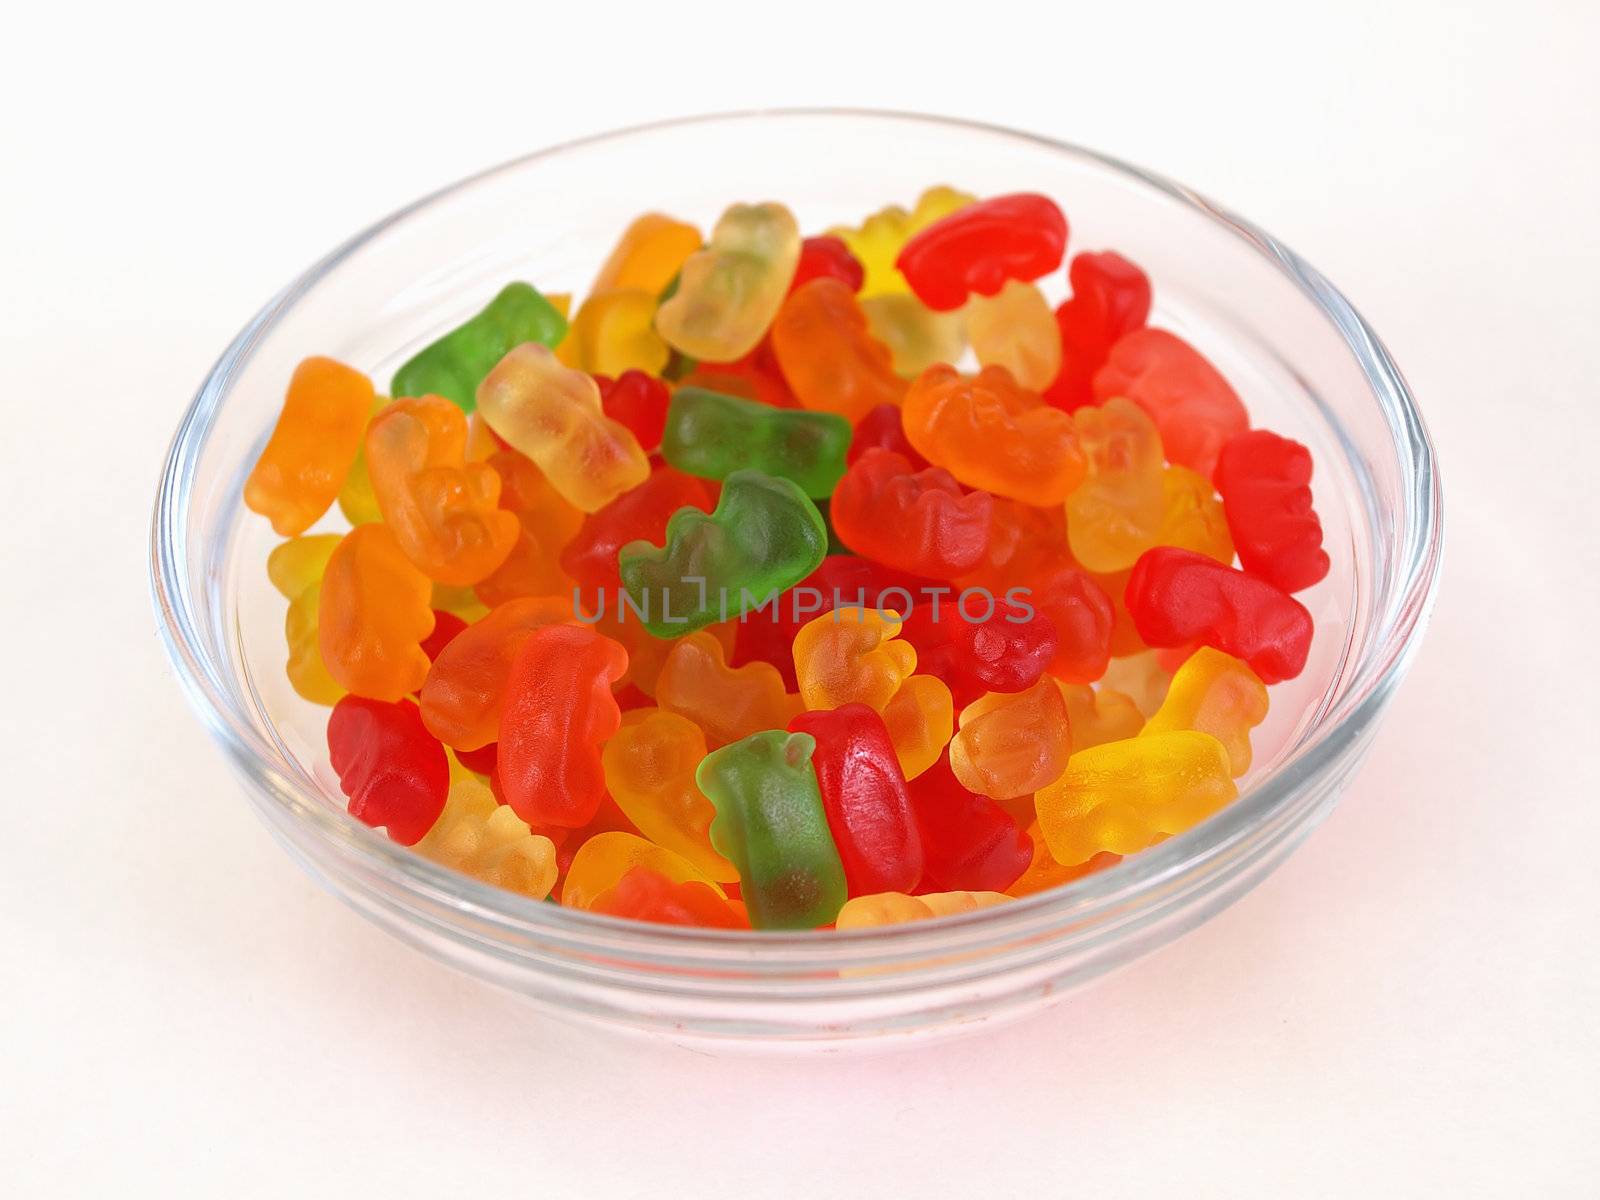 A small candy dish full of brightly colored candy bears. Over a white background.